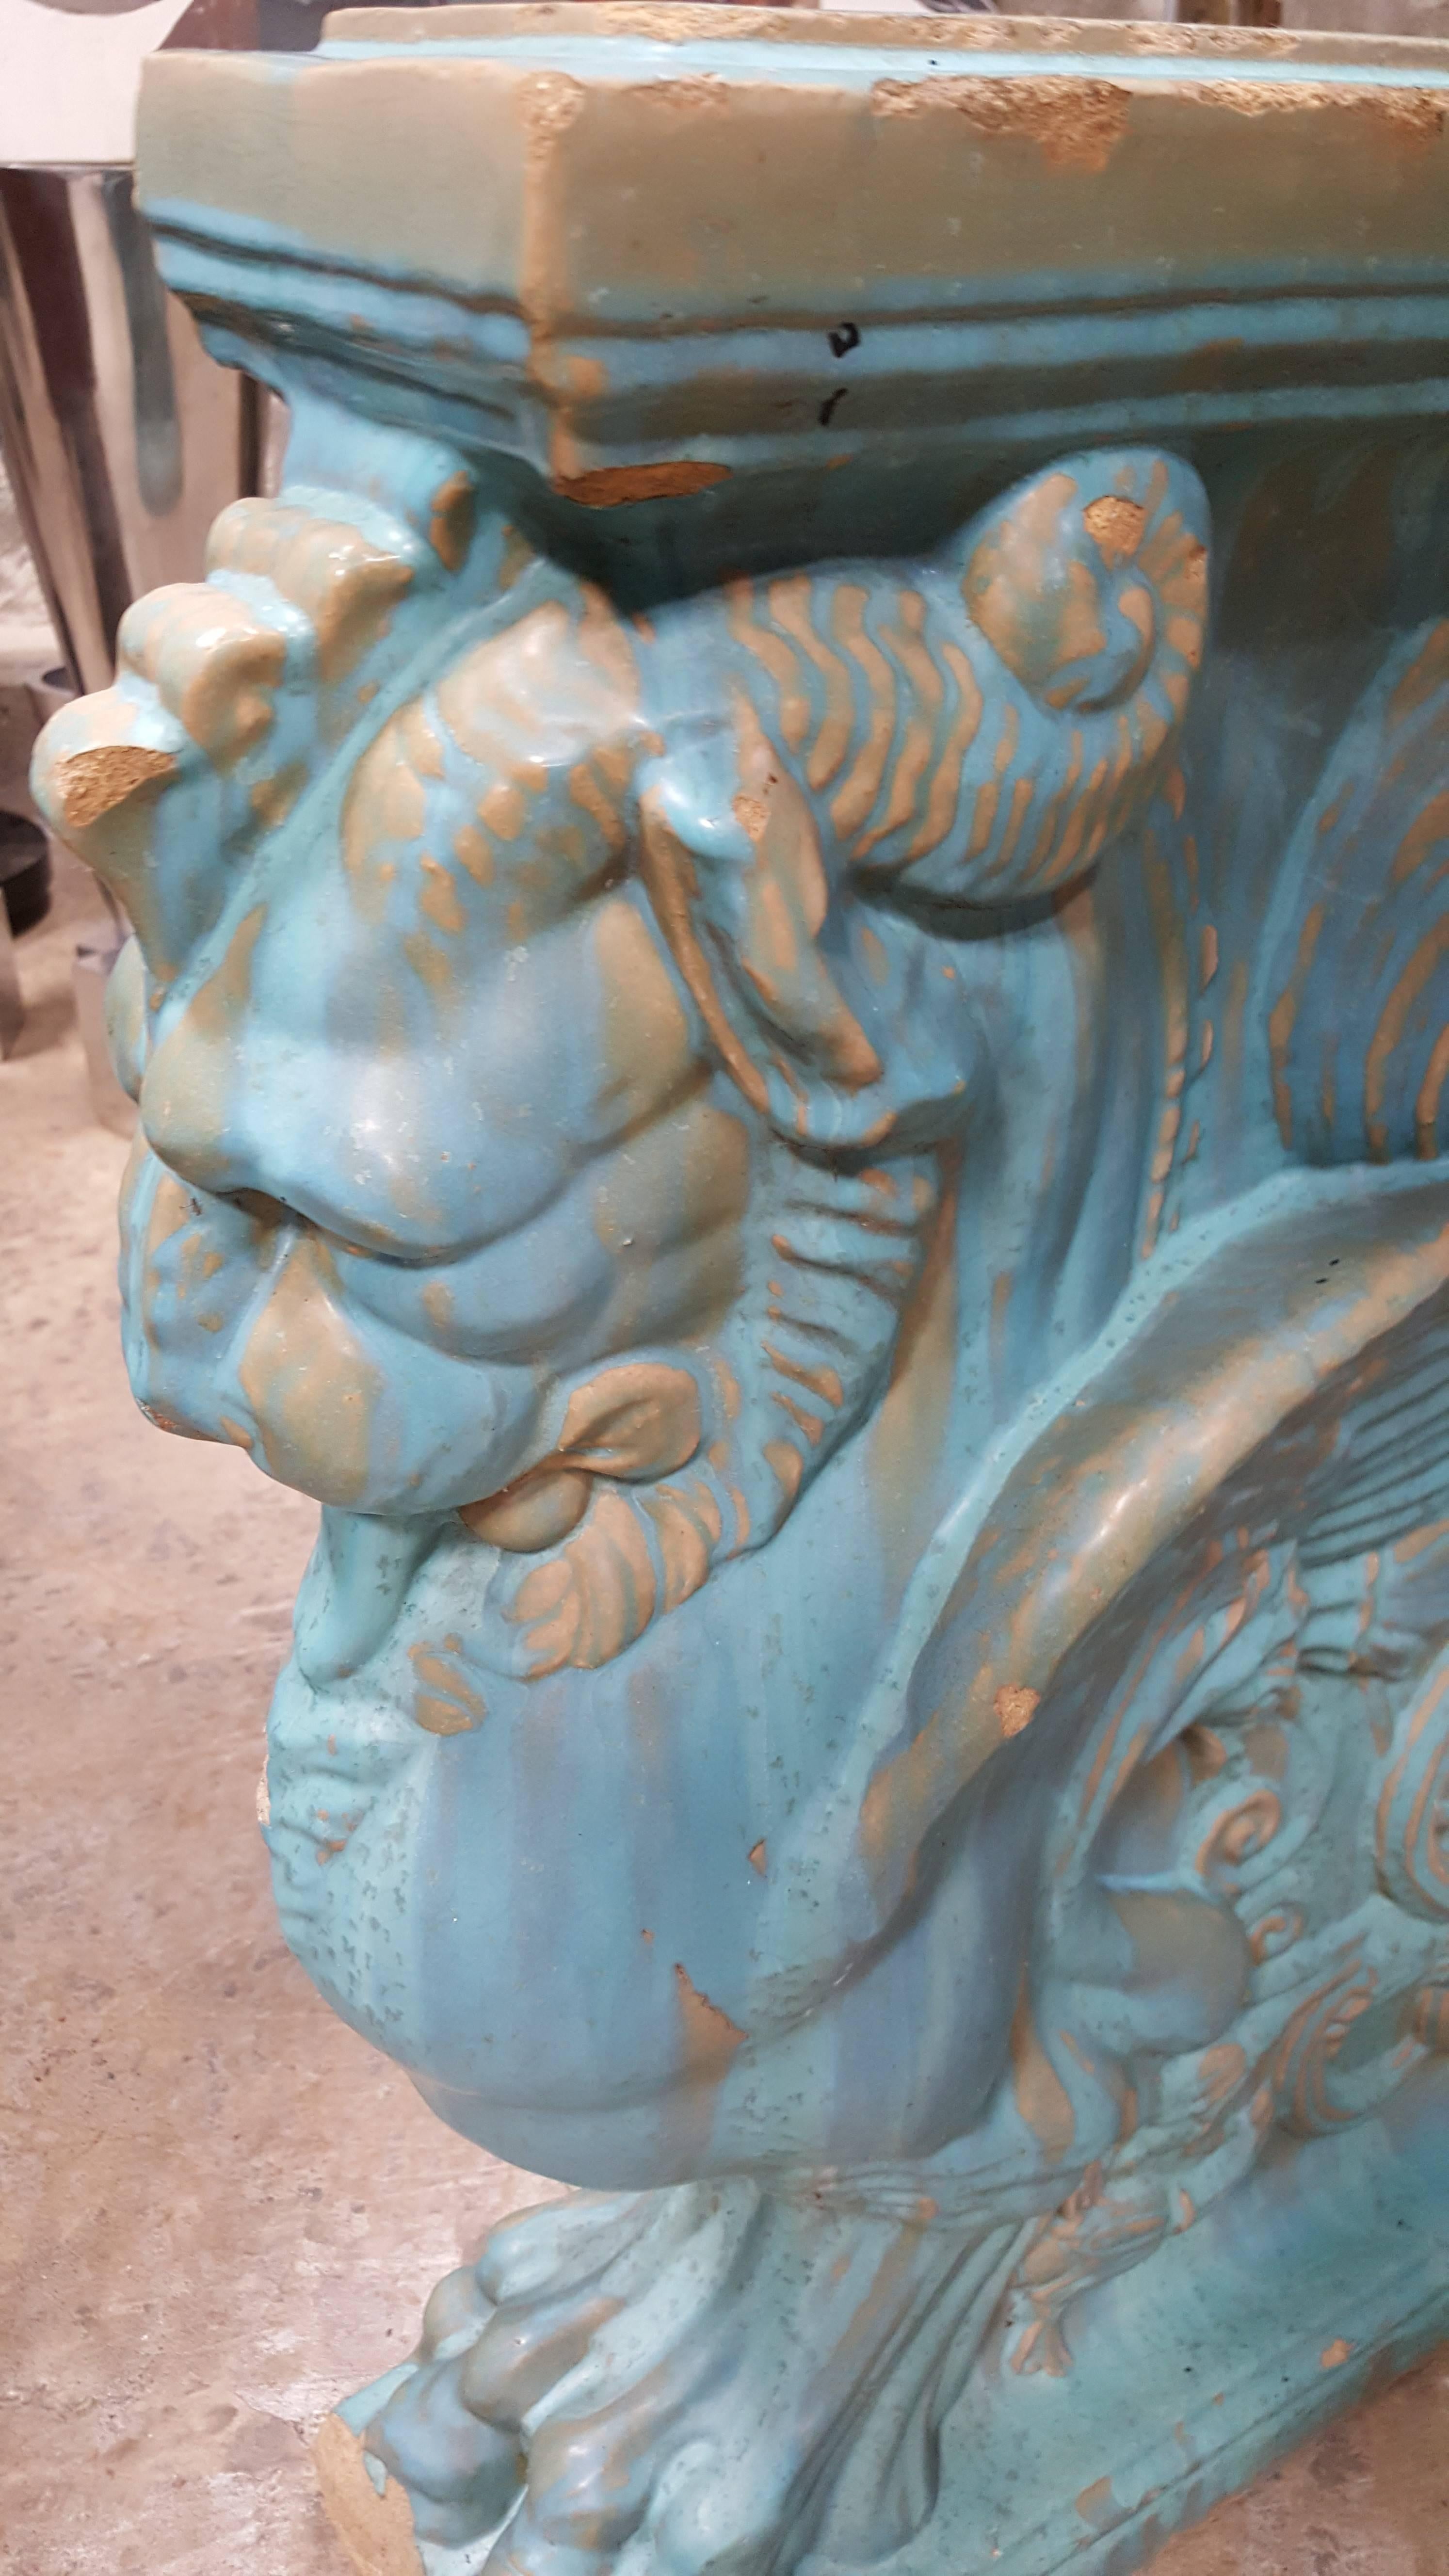 Exceptional and rare early 20th century Gladding, McBean winged lion pottery pedestal. Beautiful drippy aqua blue glaze. A striking architectural garden structure or ornament which can be enjoyed as an interior or exterior design element. Once part